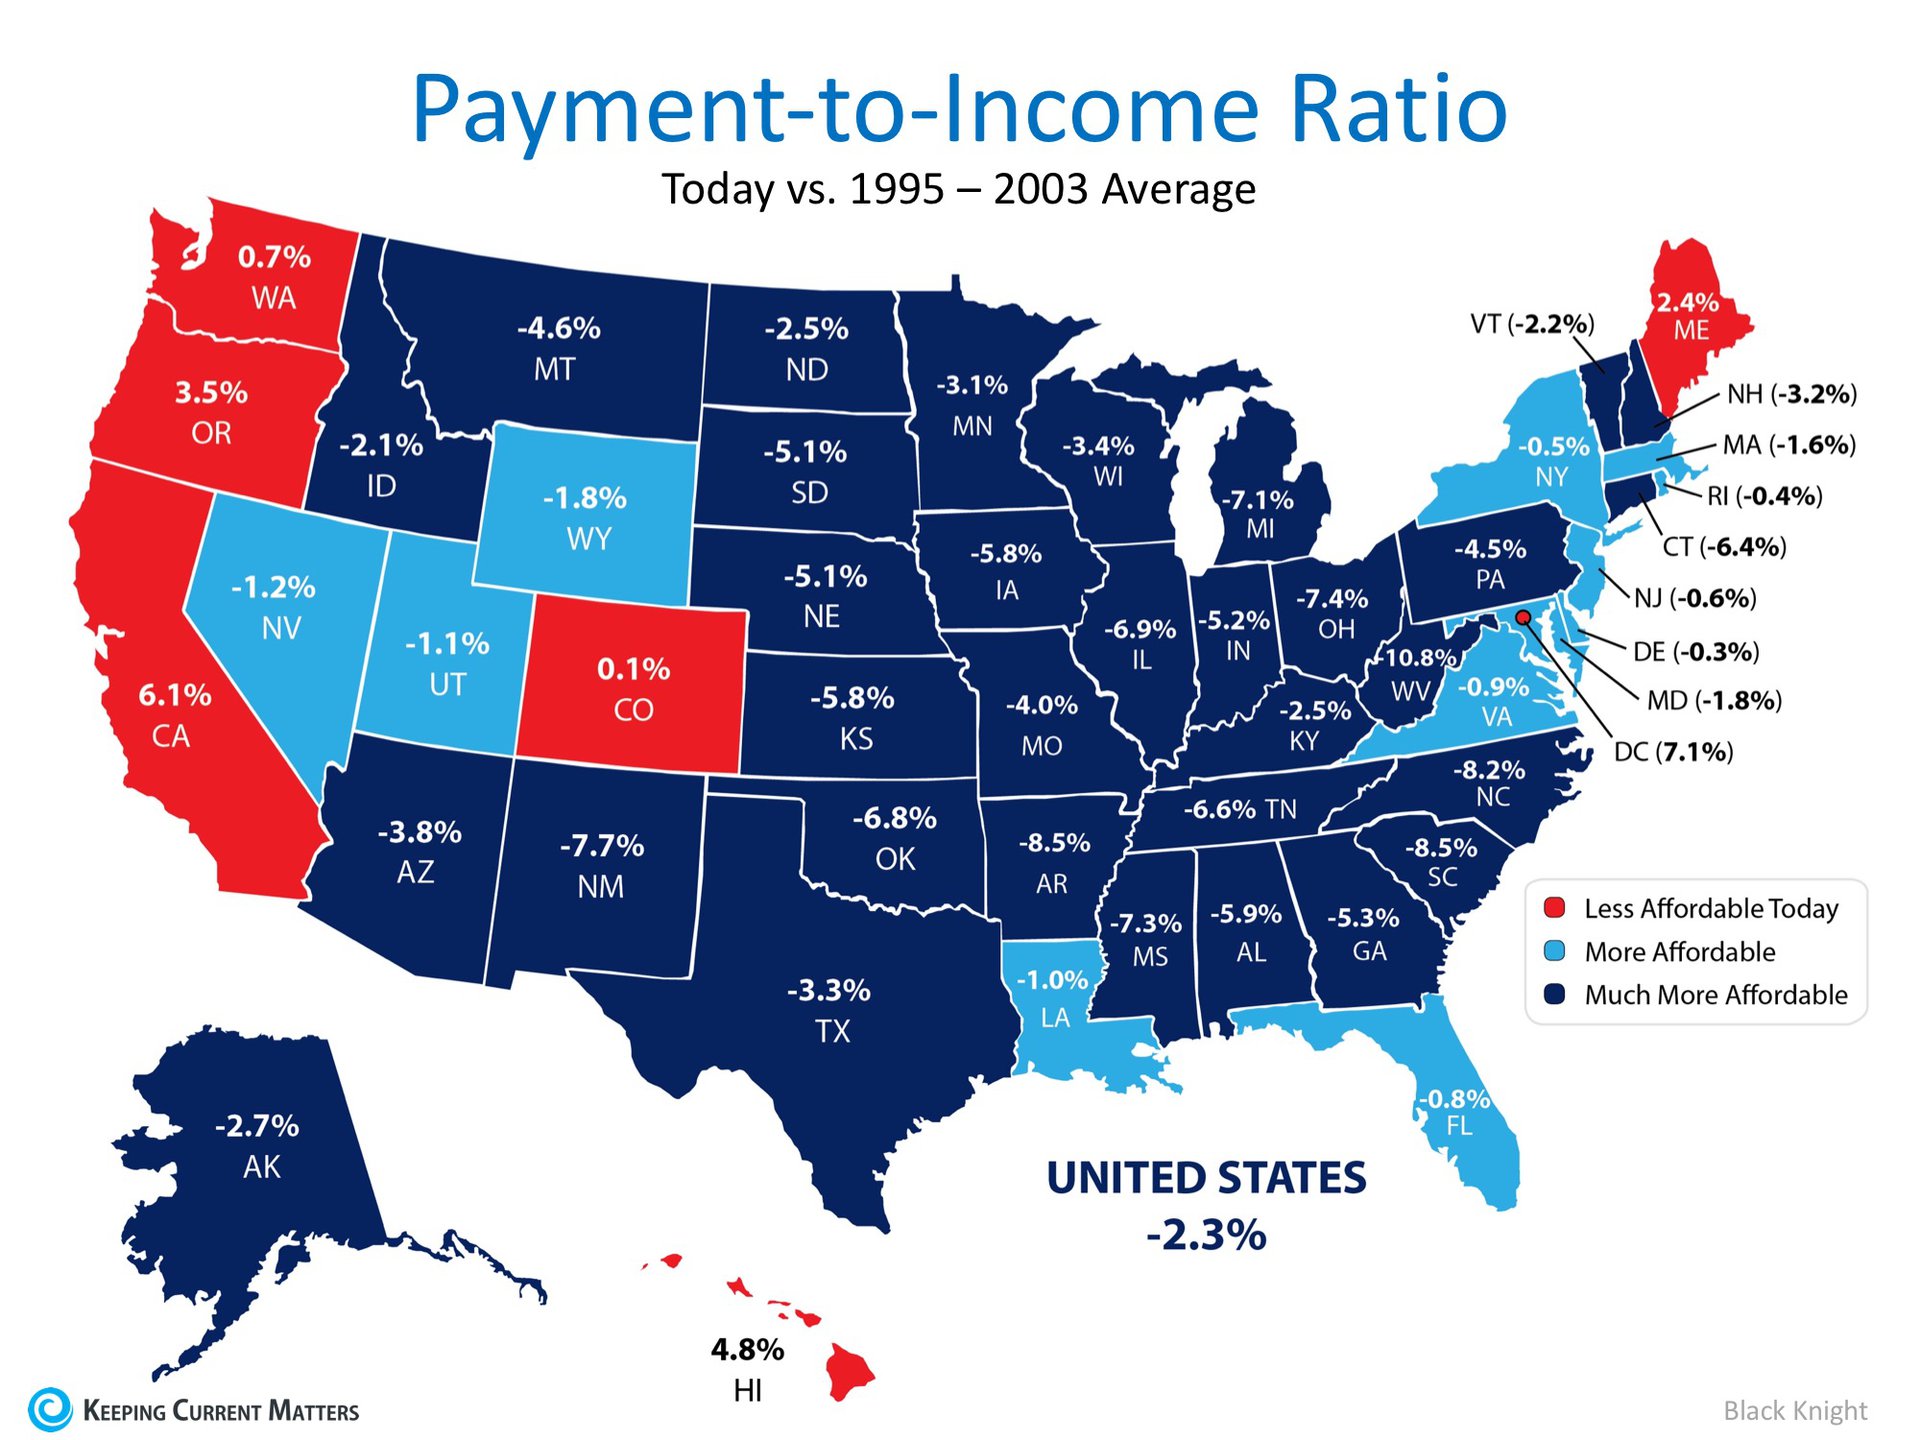 Homes are More Affordable in 44 out of 50 States | Keeping Current Matters